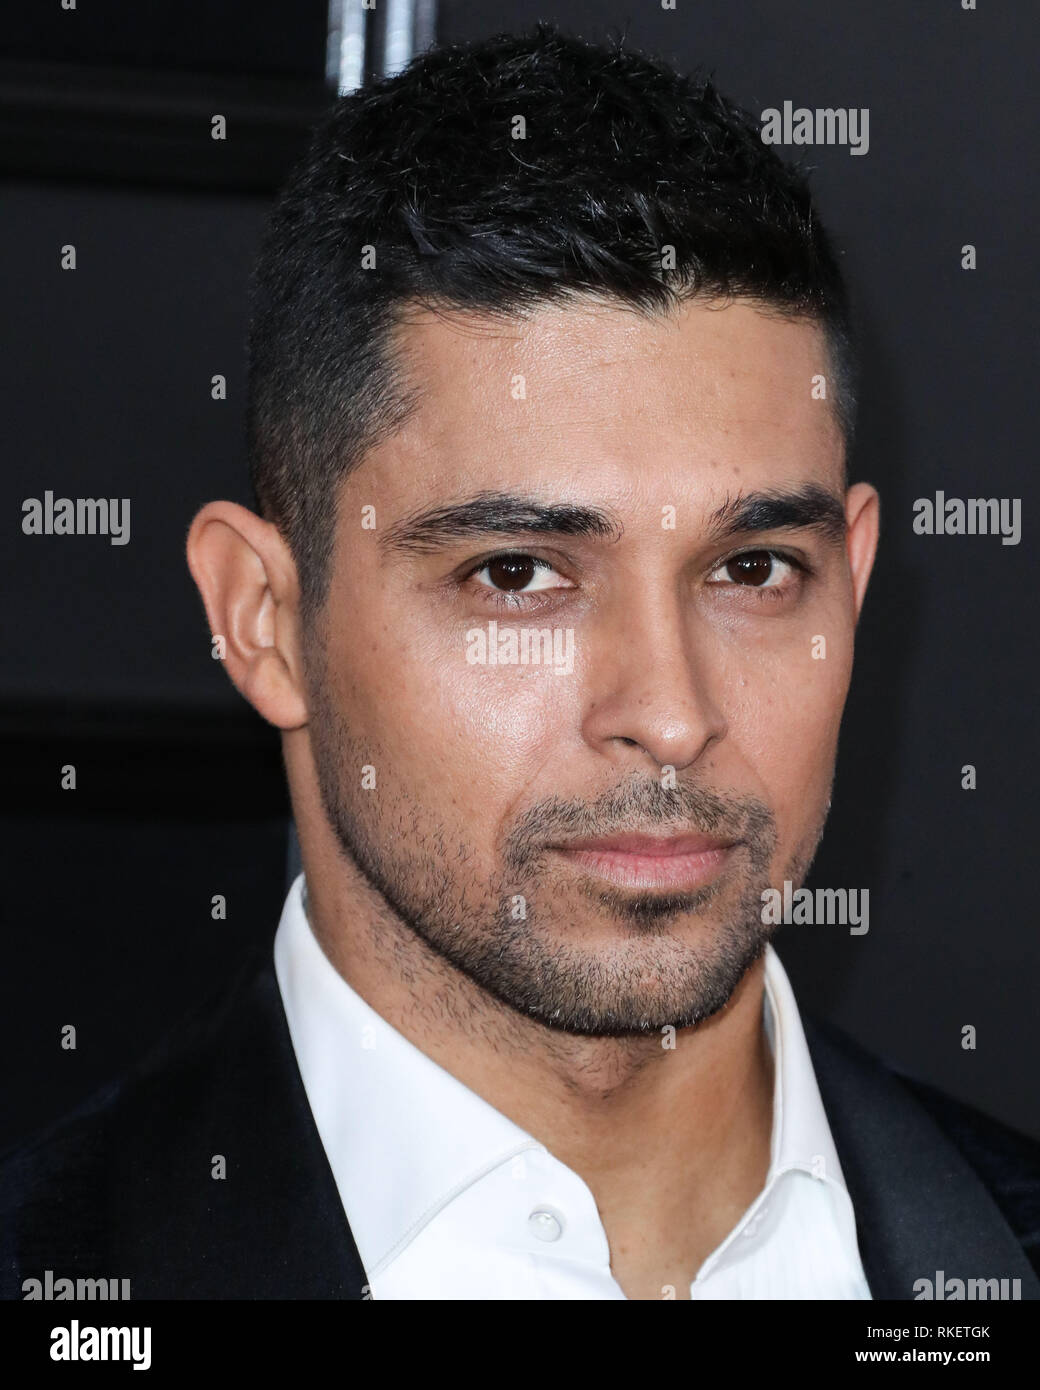 Los Angeles, United States. 10th Feb, 2019.LOS ANGELES, CA, USA - FEBRUARY 10: Wilmer Valderrama arrives at the 61st Annual GRAMMY Awards held at Staples Center on February 10, 2019 in Los Angeles, California, United States. (Photo by Xavier Collin/Image Press Agency) Credit: Image Press Agency/Alamy Live News Stock Photo